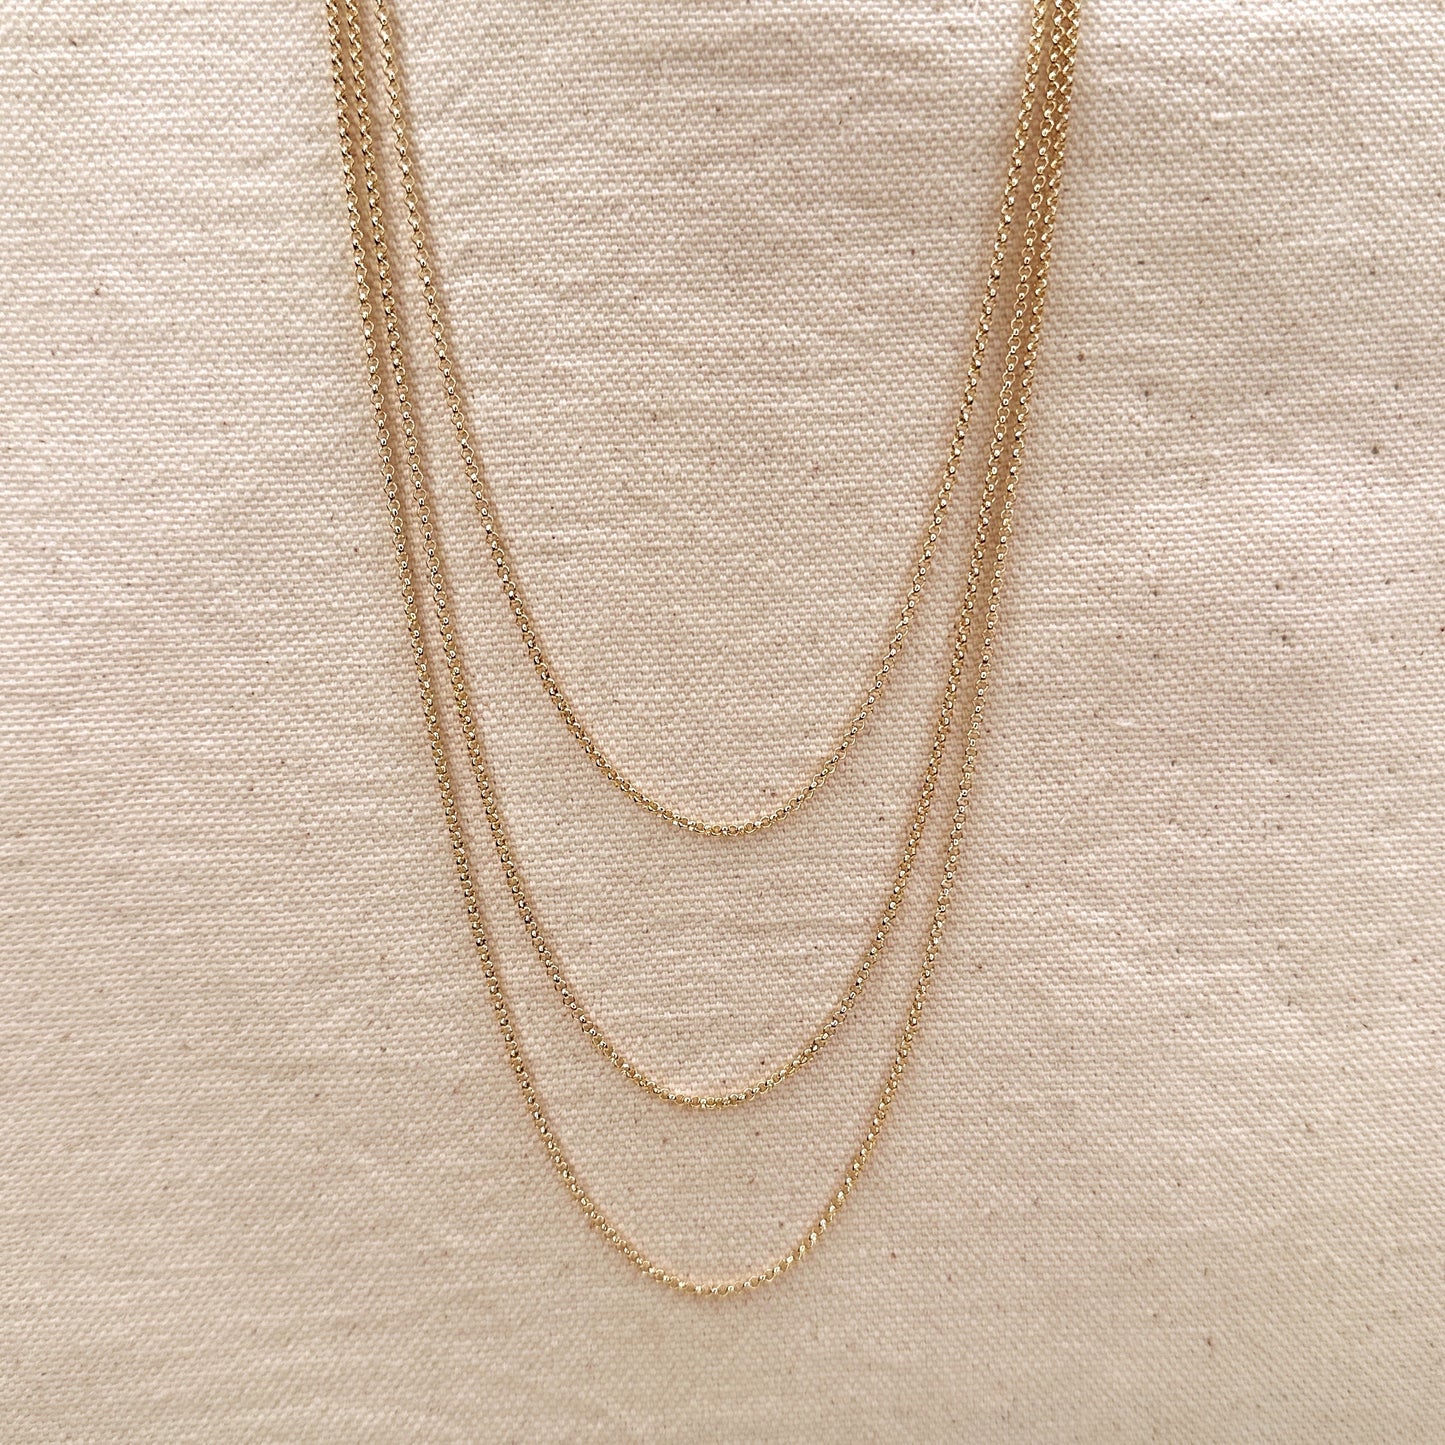 18k Gold Filled 1.5mm Rolo Chain Available in 16", 18", 20", 24"